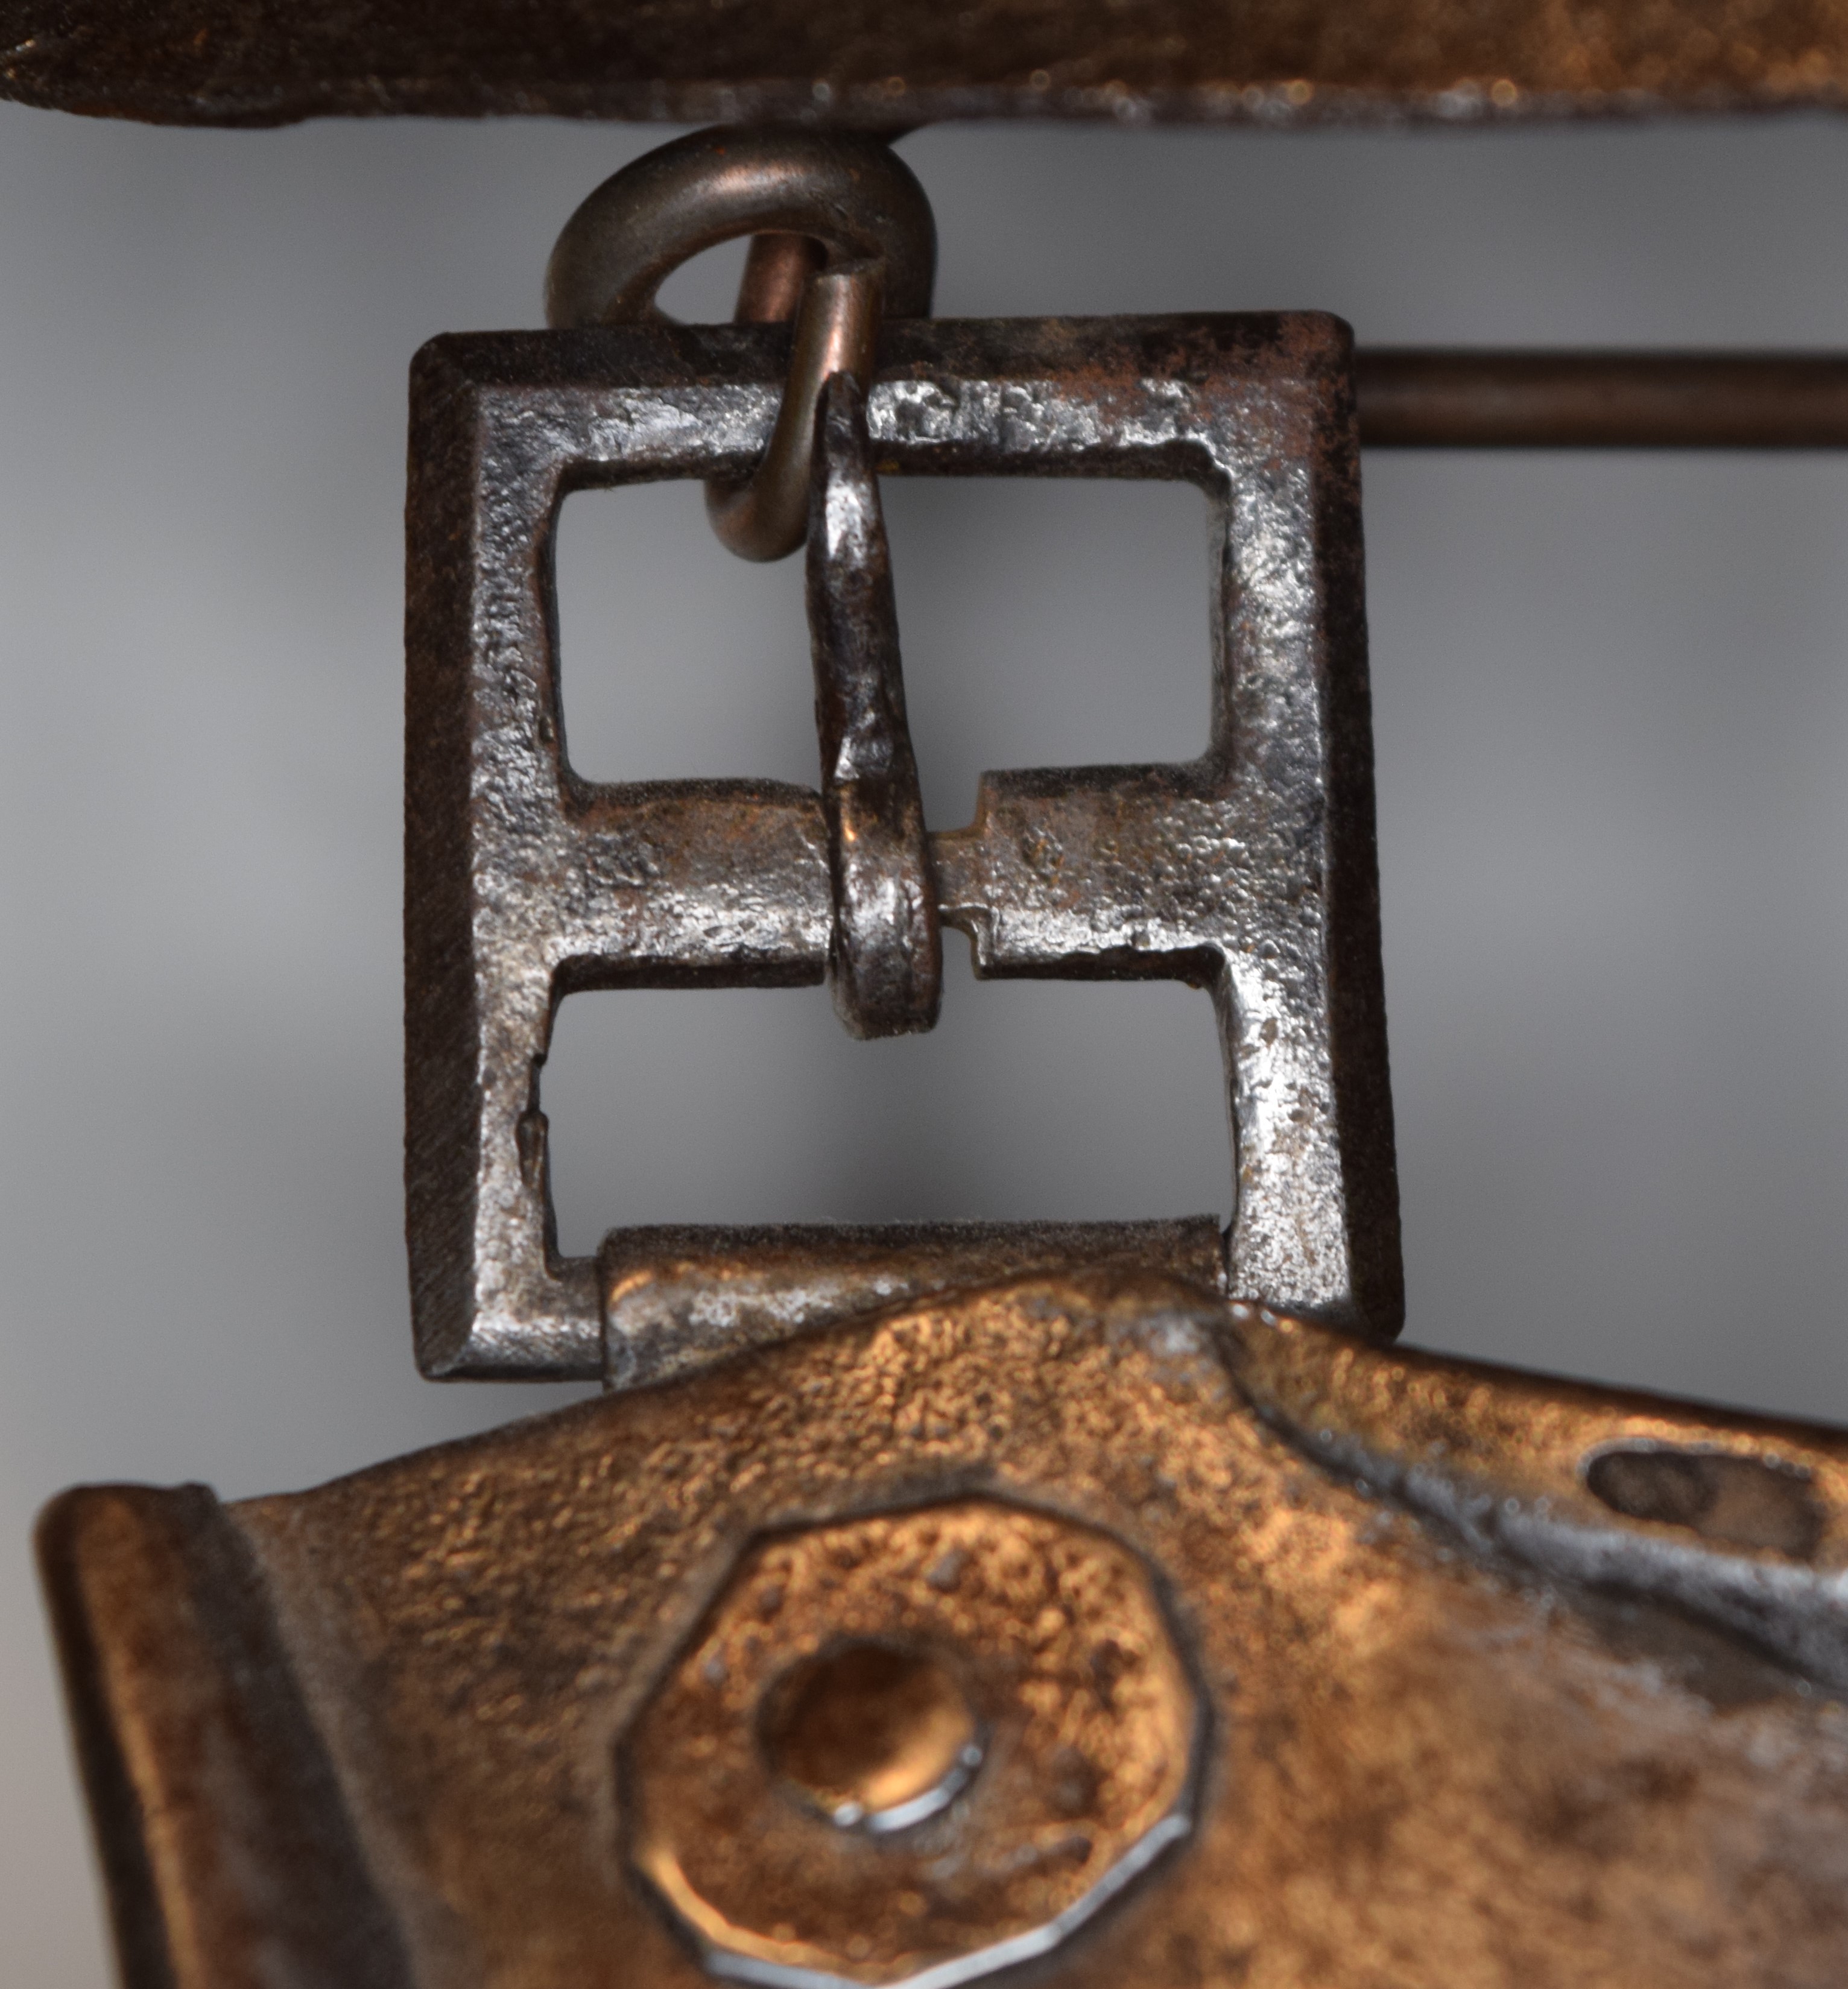 Buckle at the shoulder on an early 16th c. breastplate, but it may easily be associated.